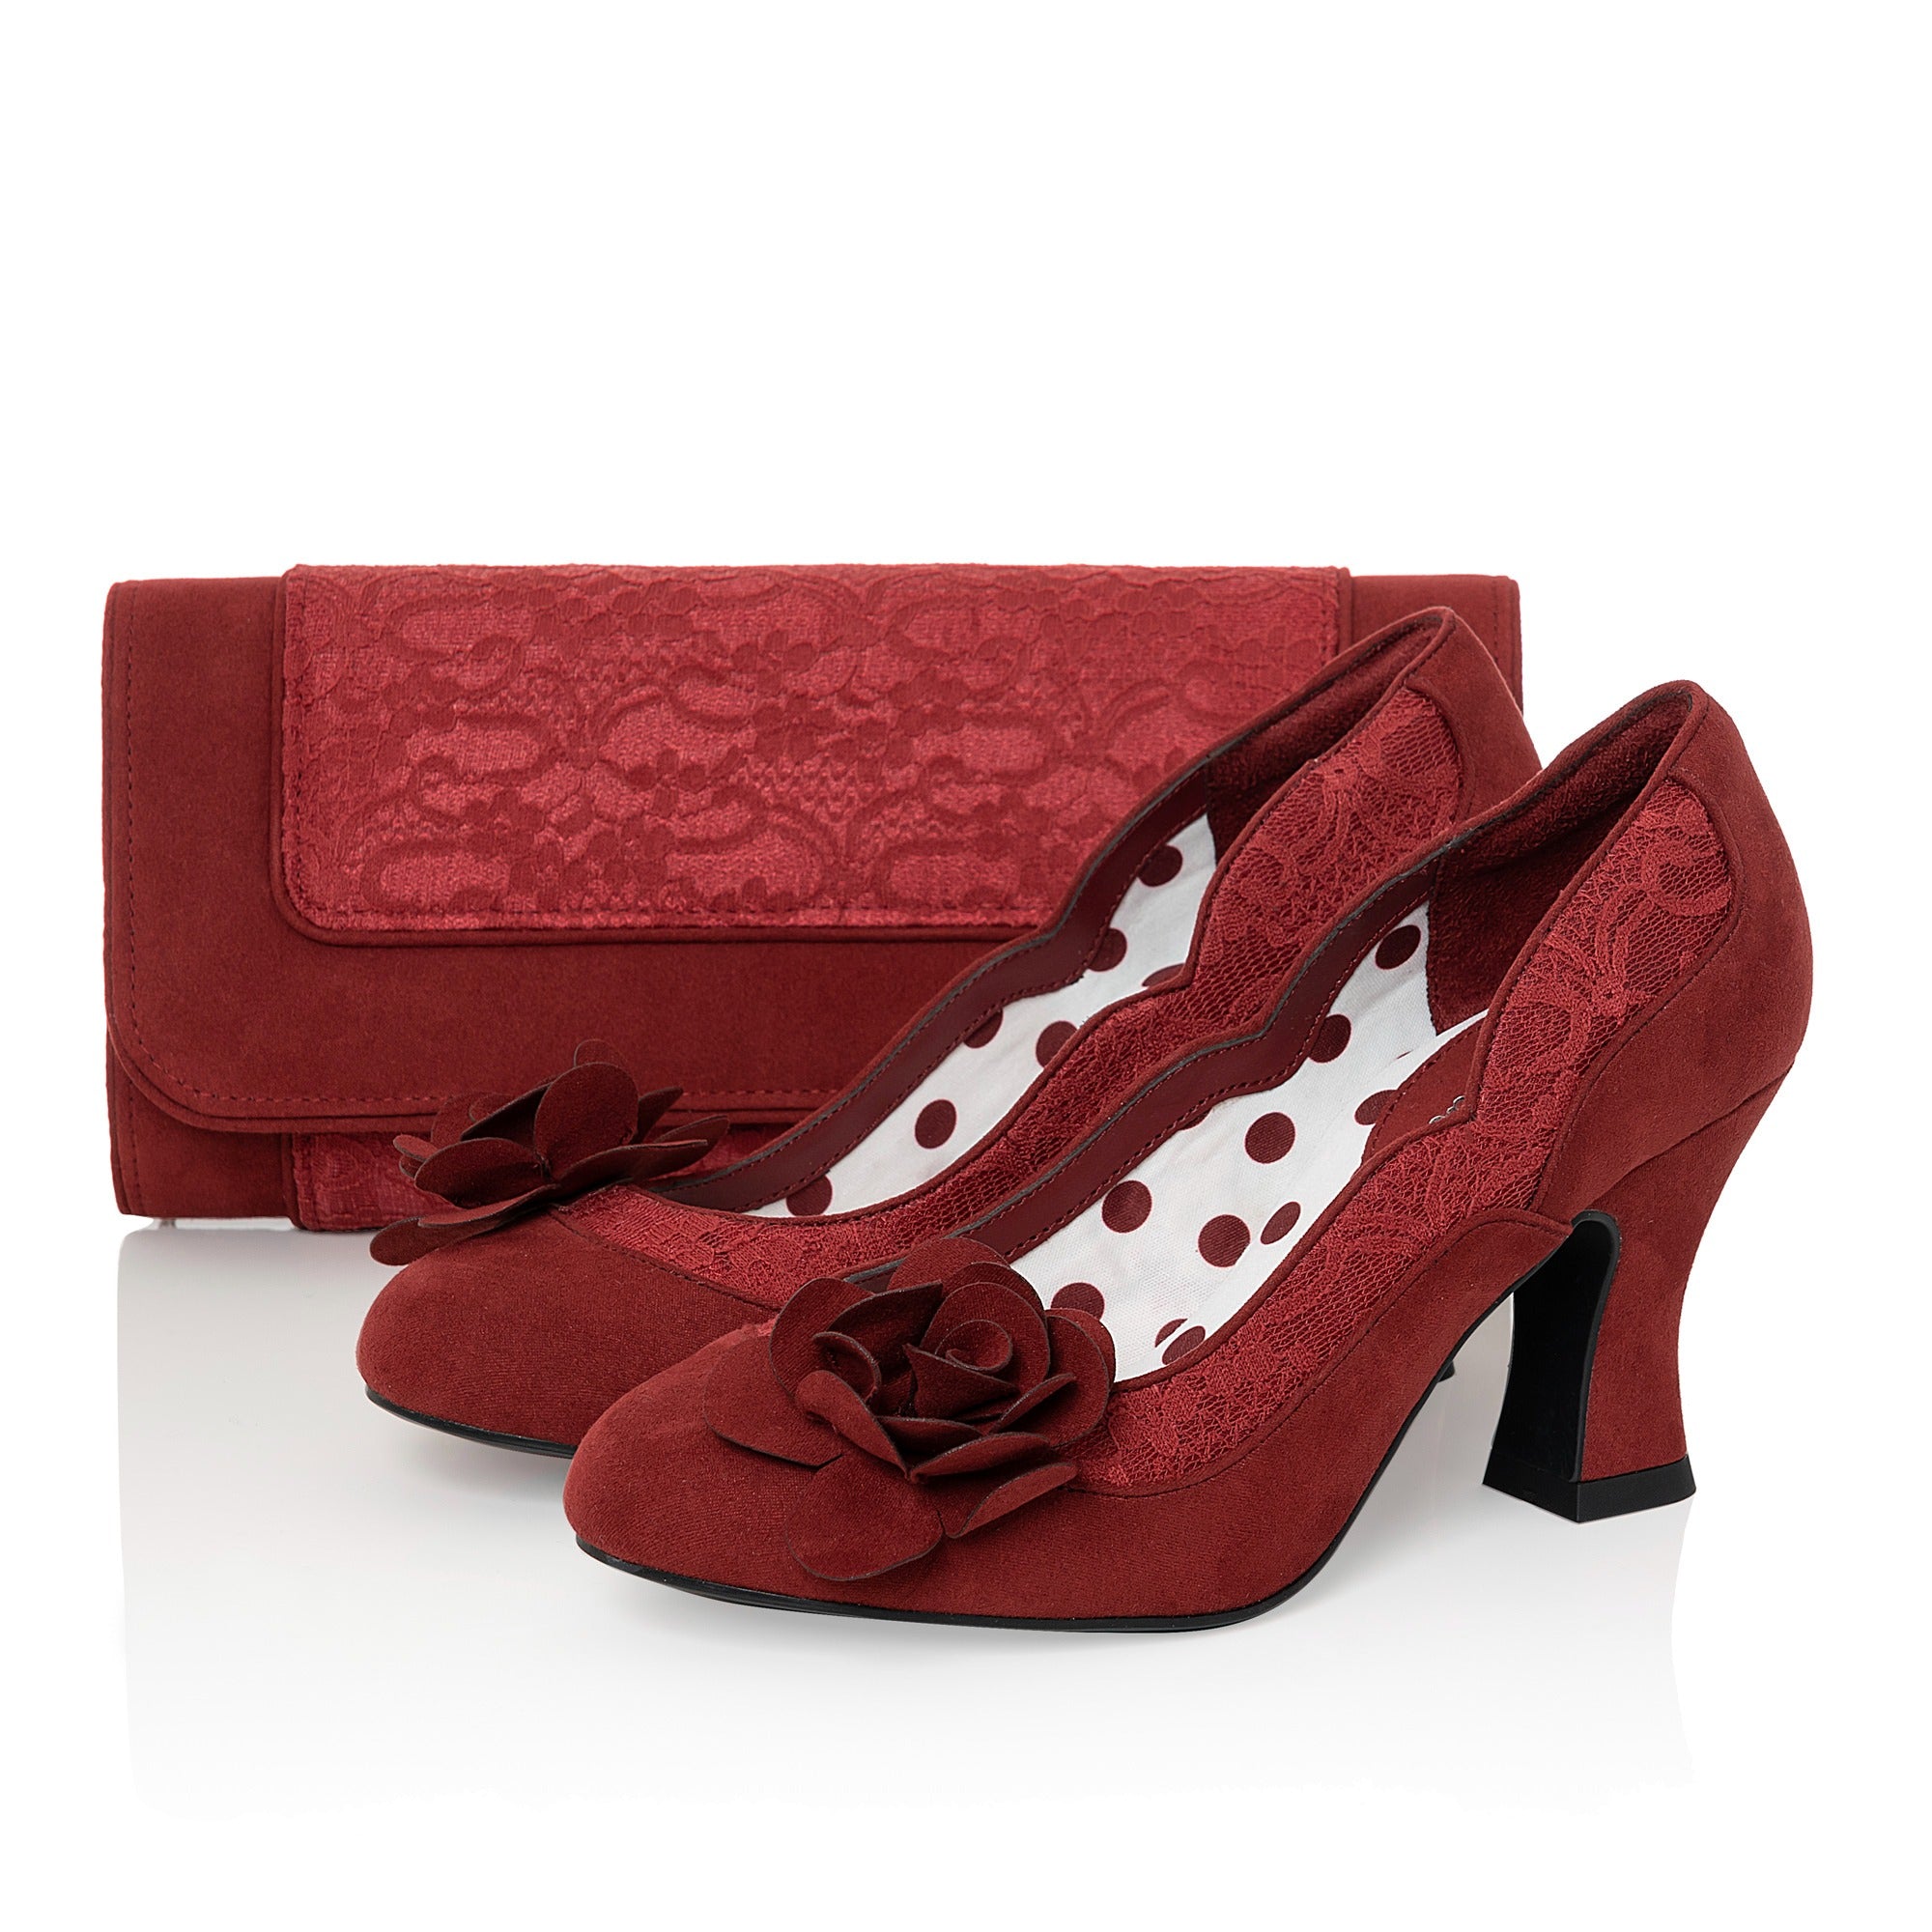 Ruby Shoo Crimson Red Heeled Corsage Court Shoes